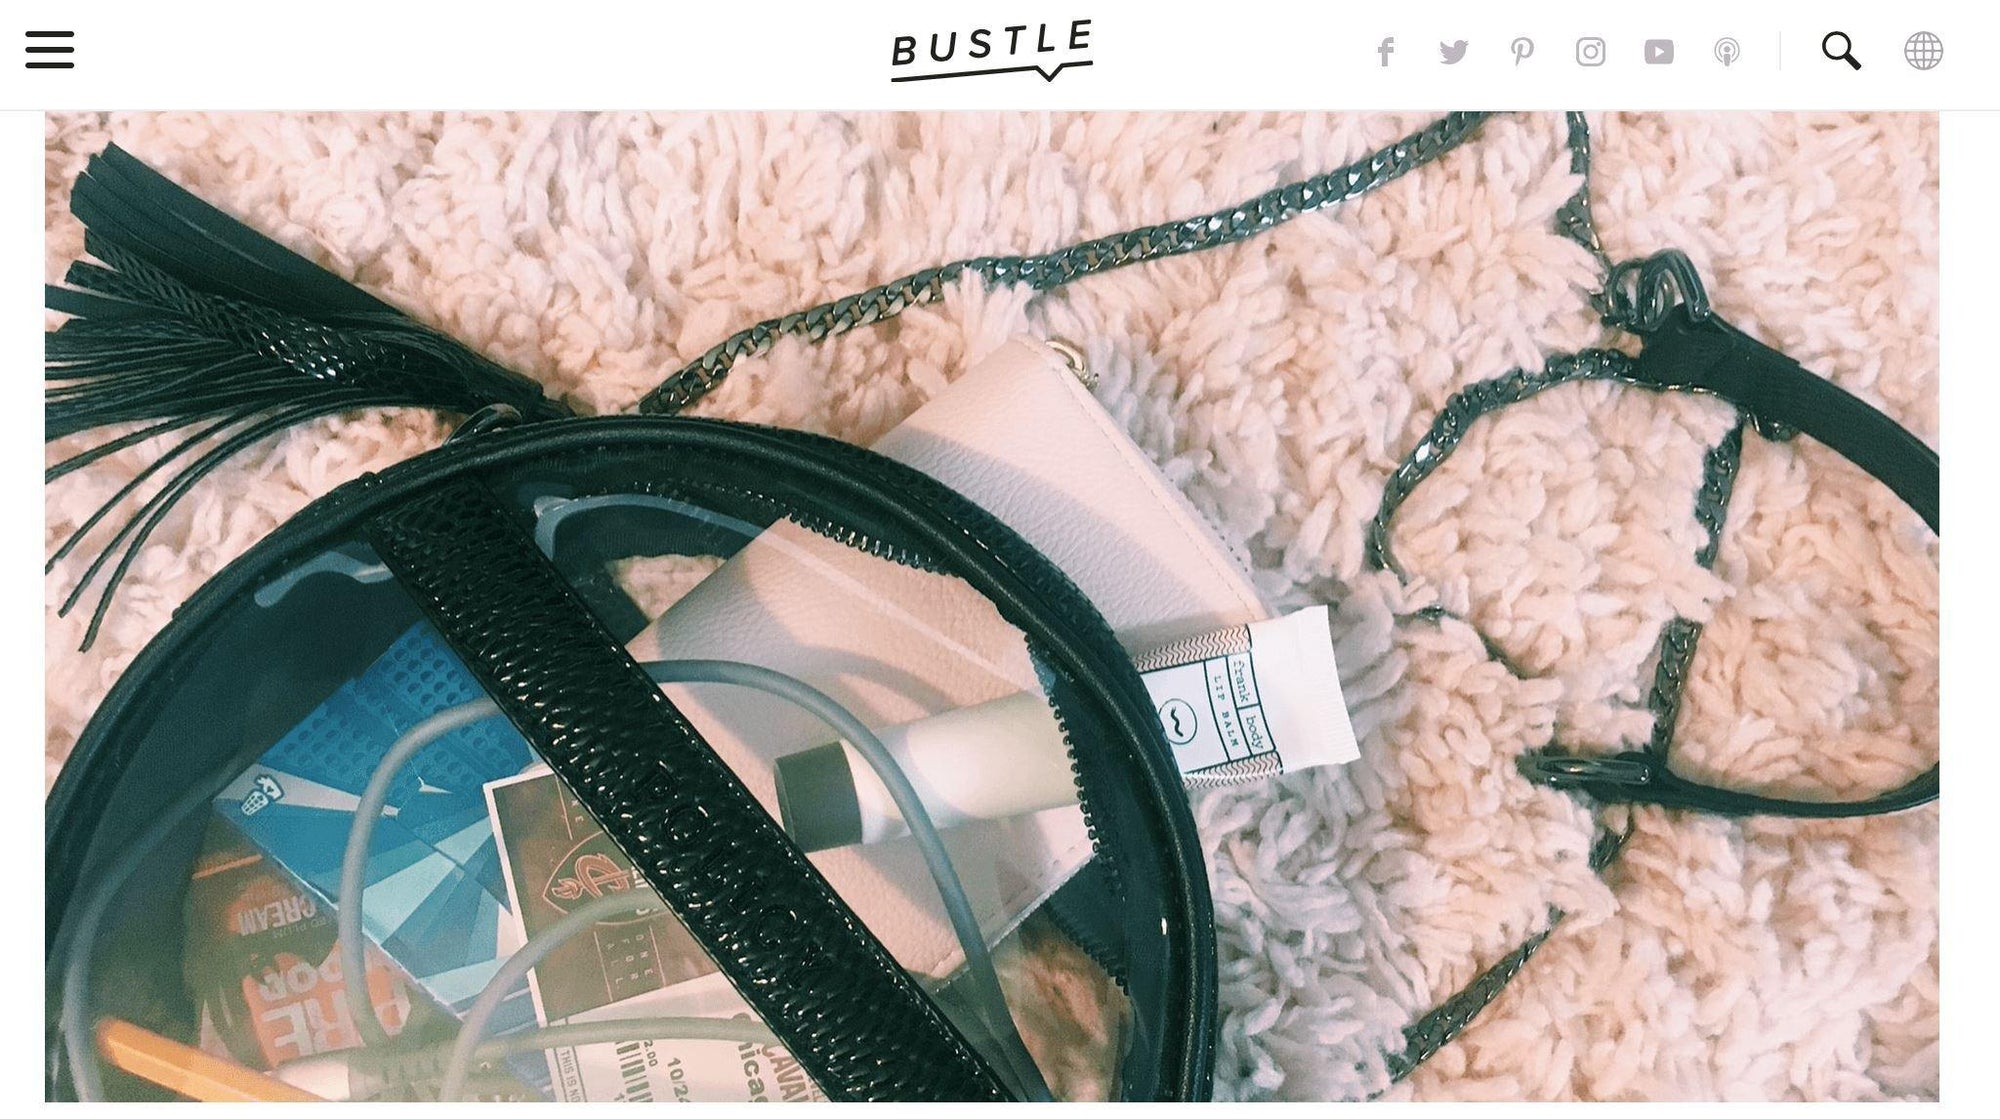 BUSTLE.com Feature | Policy Handbags Are Designed For Stadium Regulations But Are Also Super Trendy - POLICY Handbags